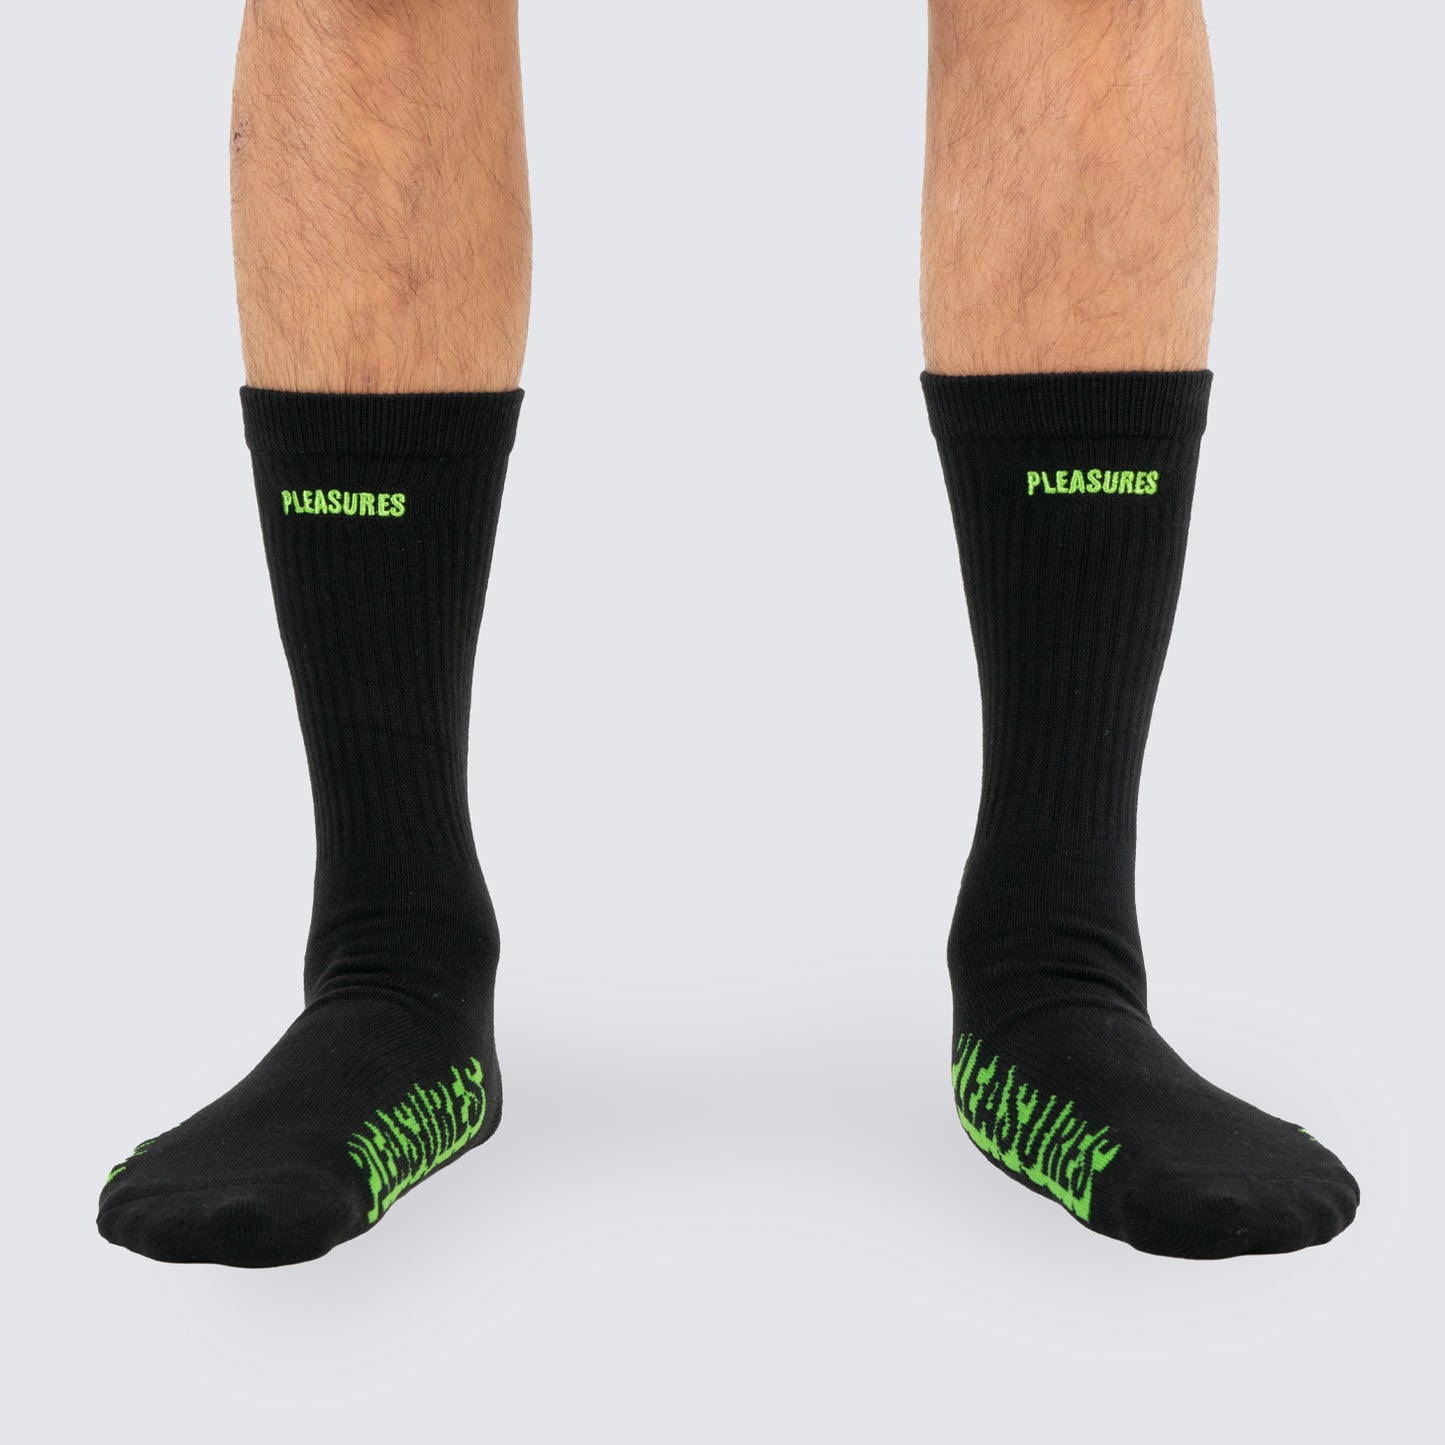 KNOCK OUT SOCKS